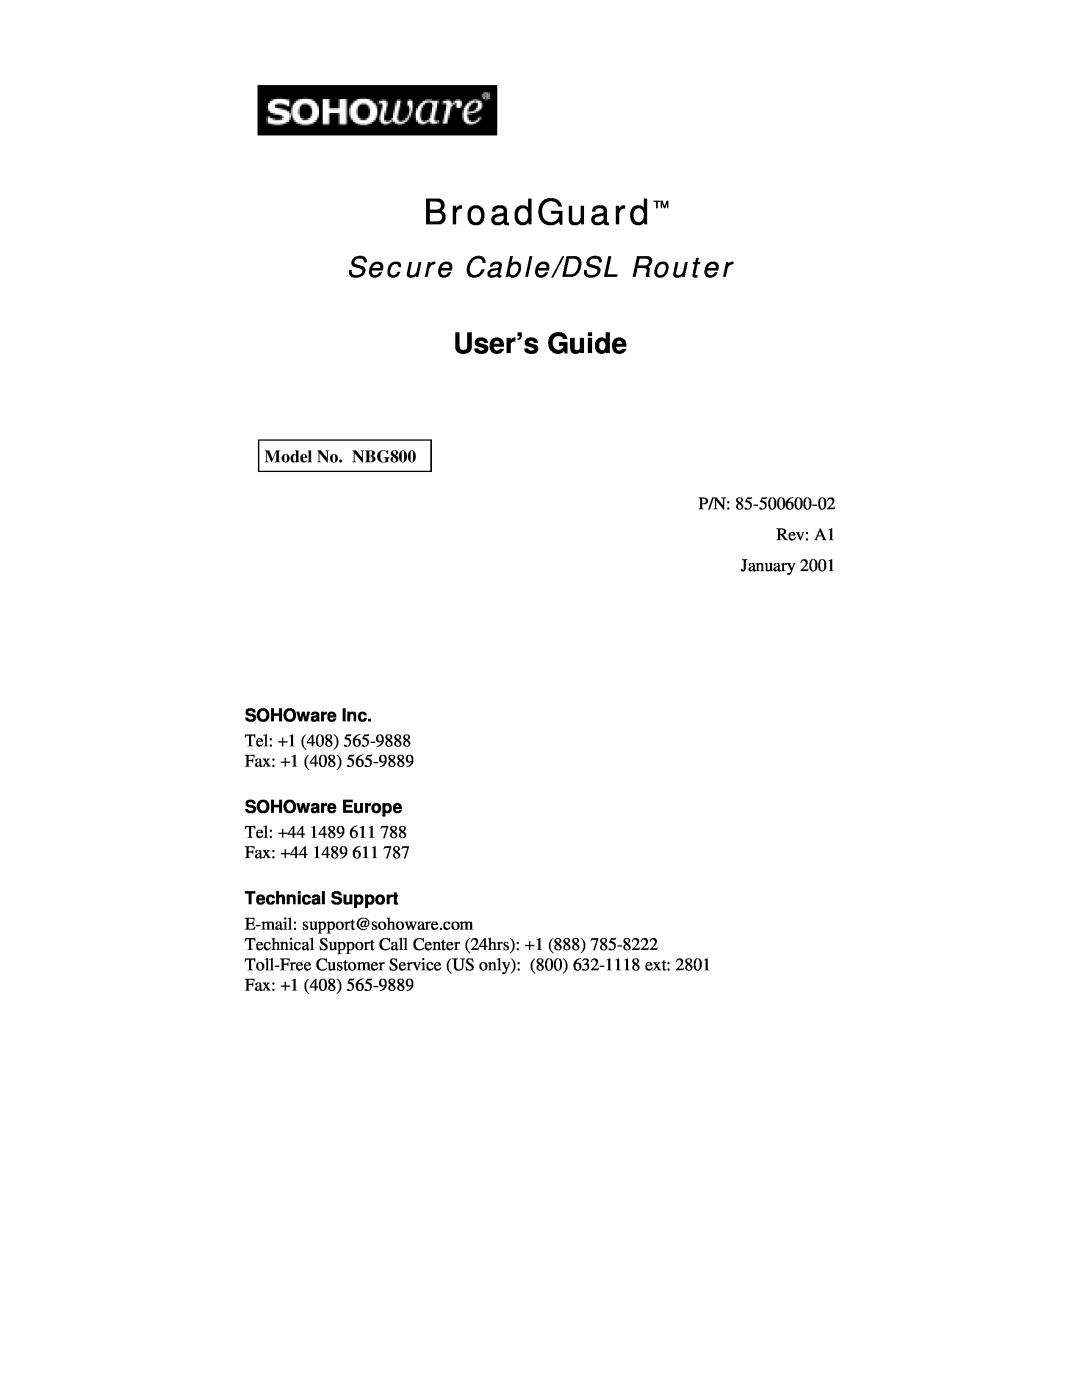 Soho NBG800 manual User’s Guide, SOHOware Inc, SOHOware Europe, Technical Support, BroadGuard, Secure Cable/DSL Router 